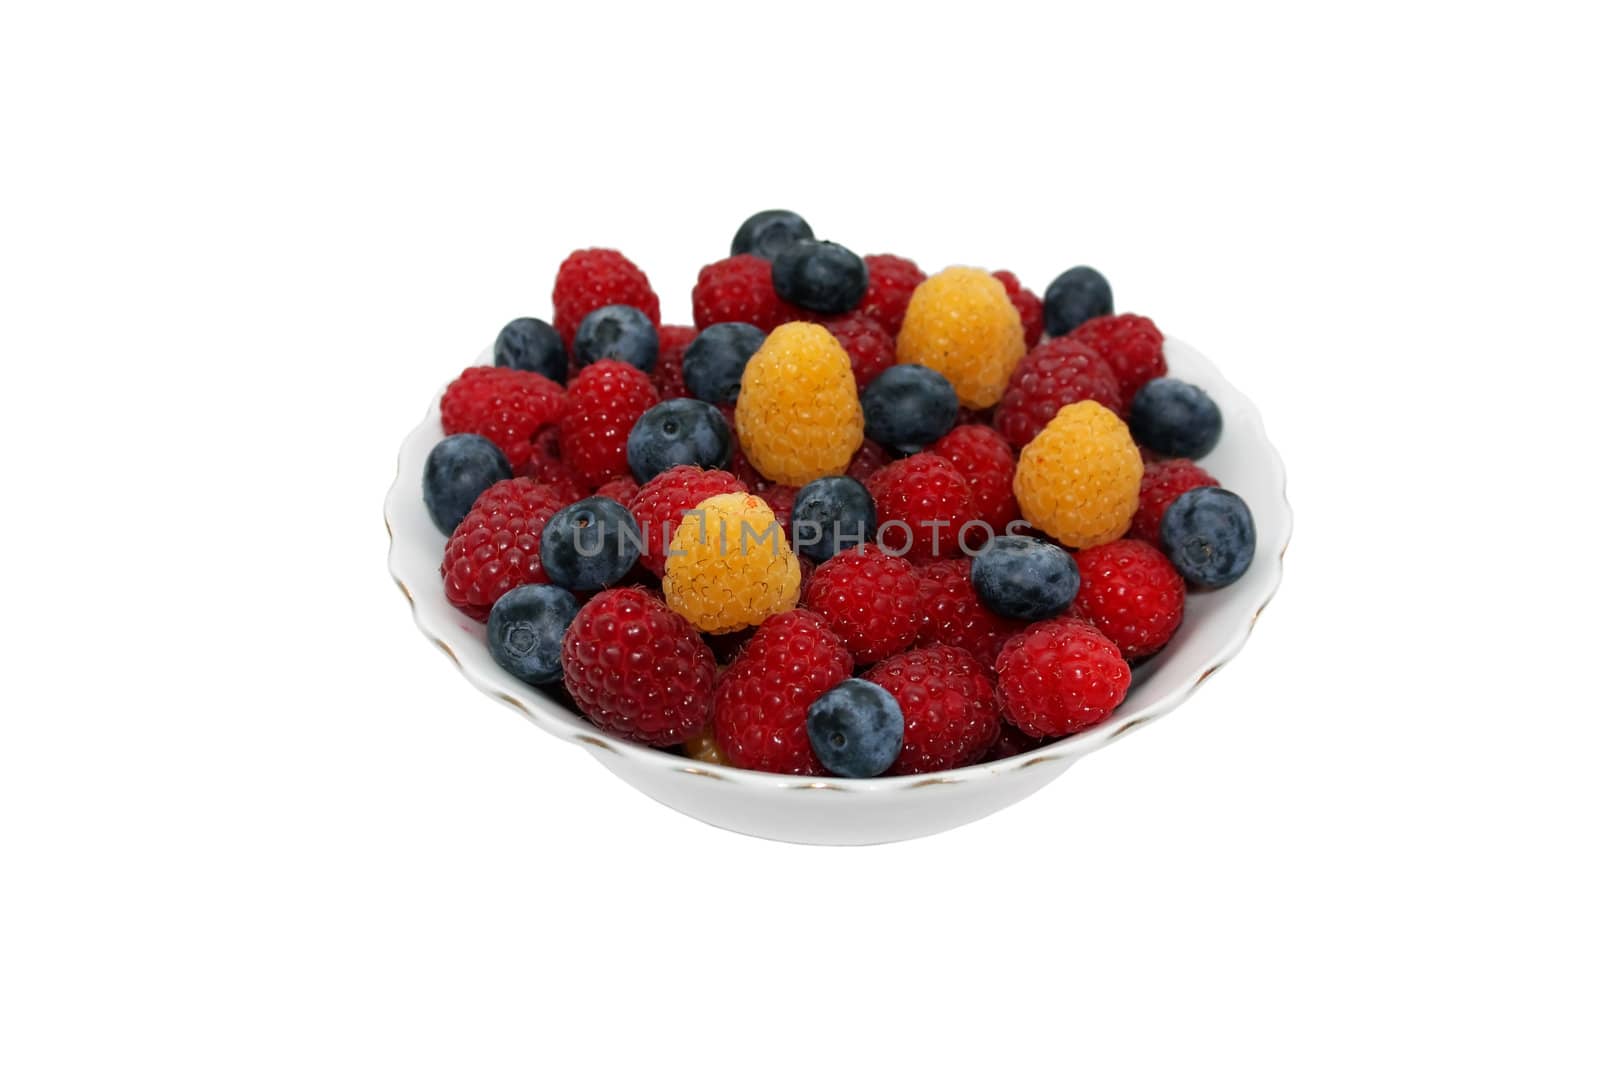 Red and yellow raspberries and blueberries in the bowl, isolated